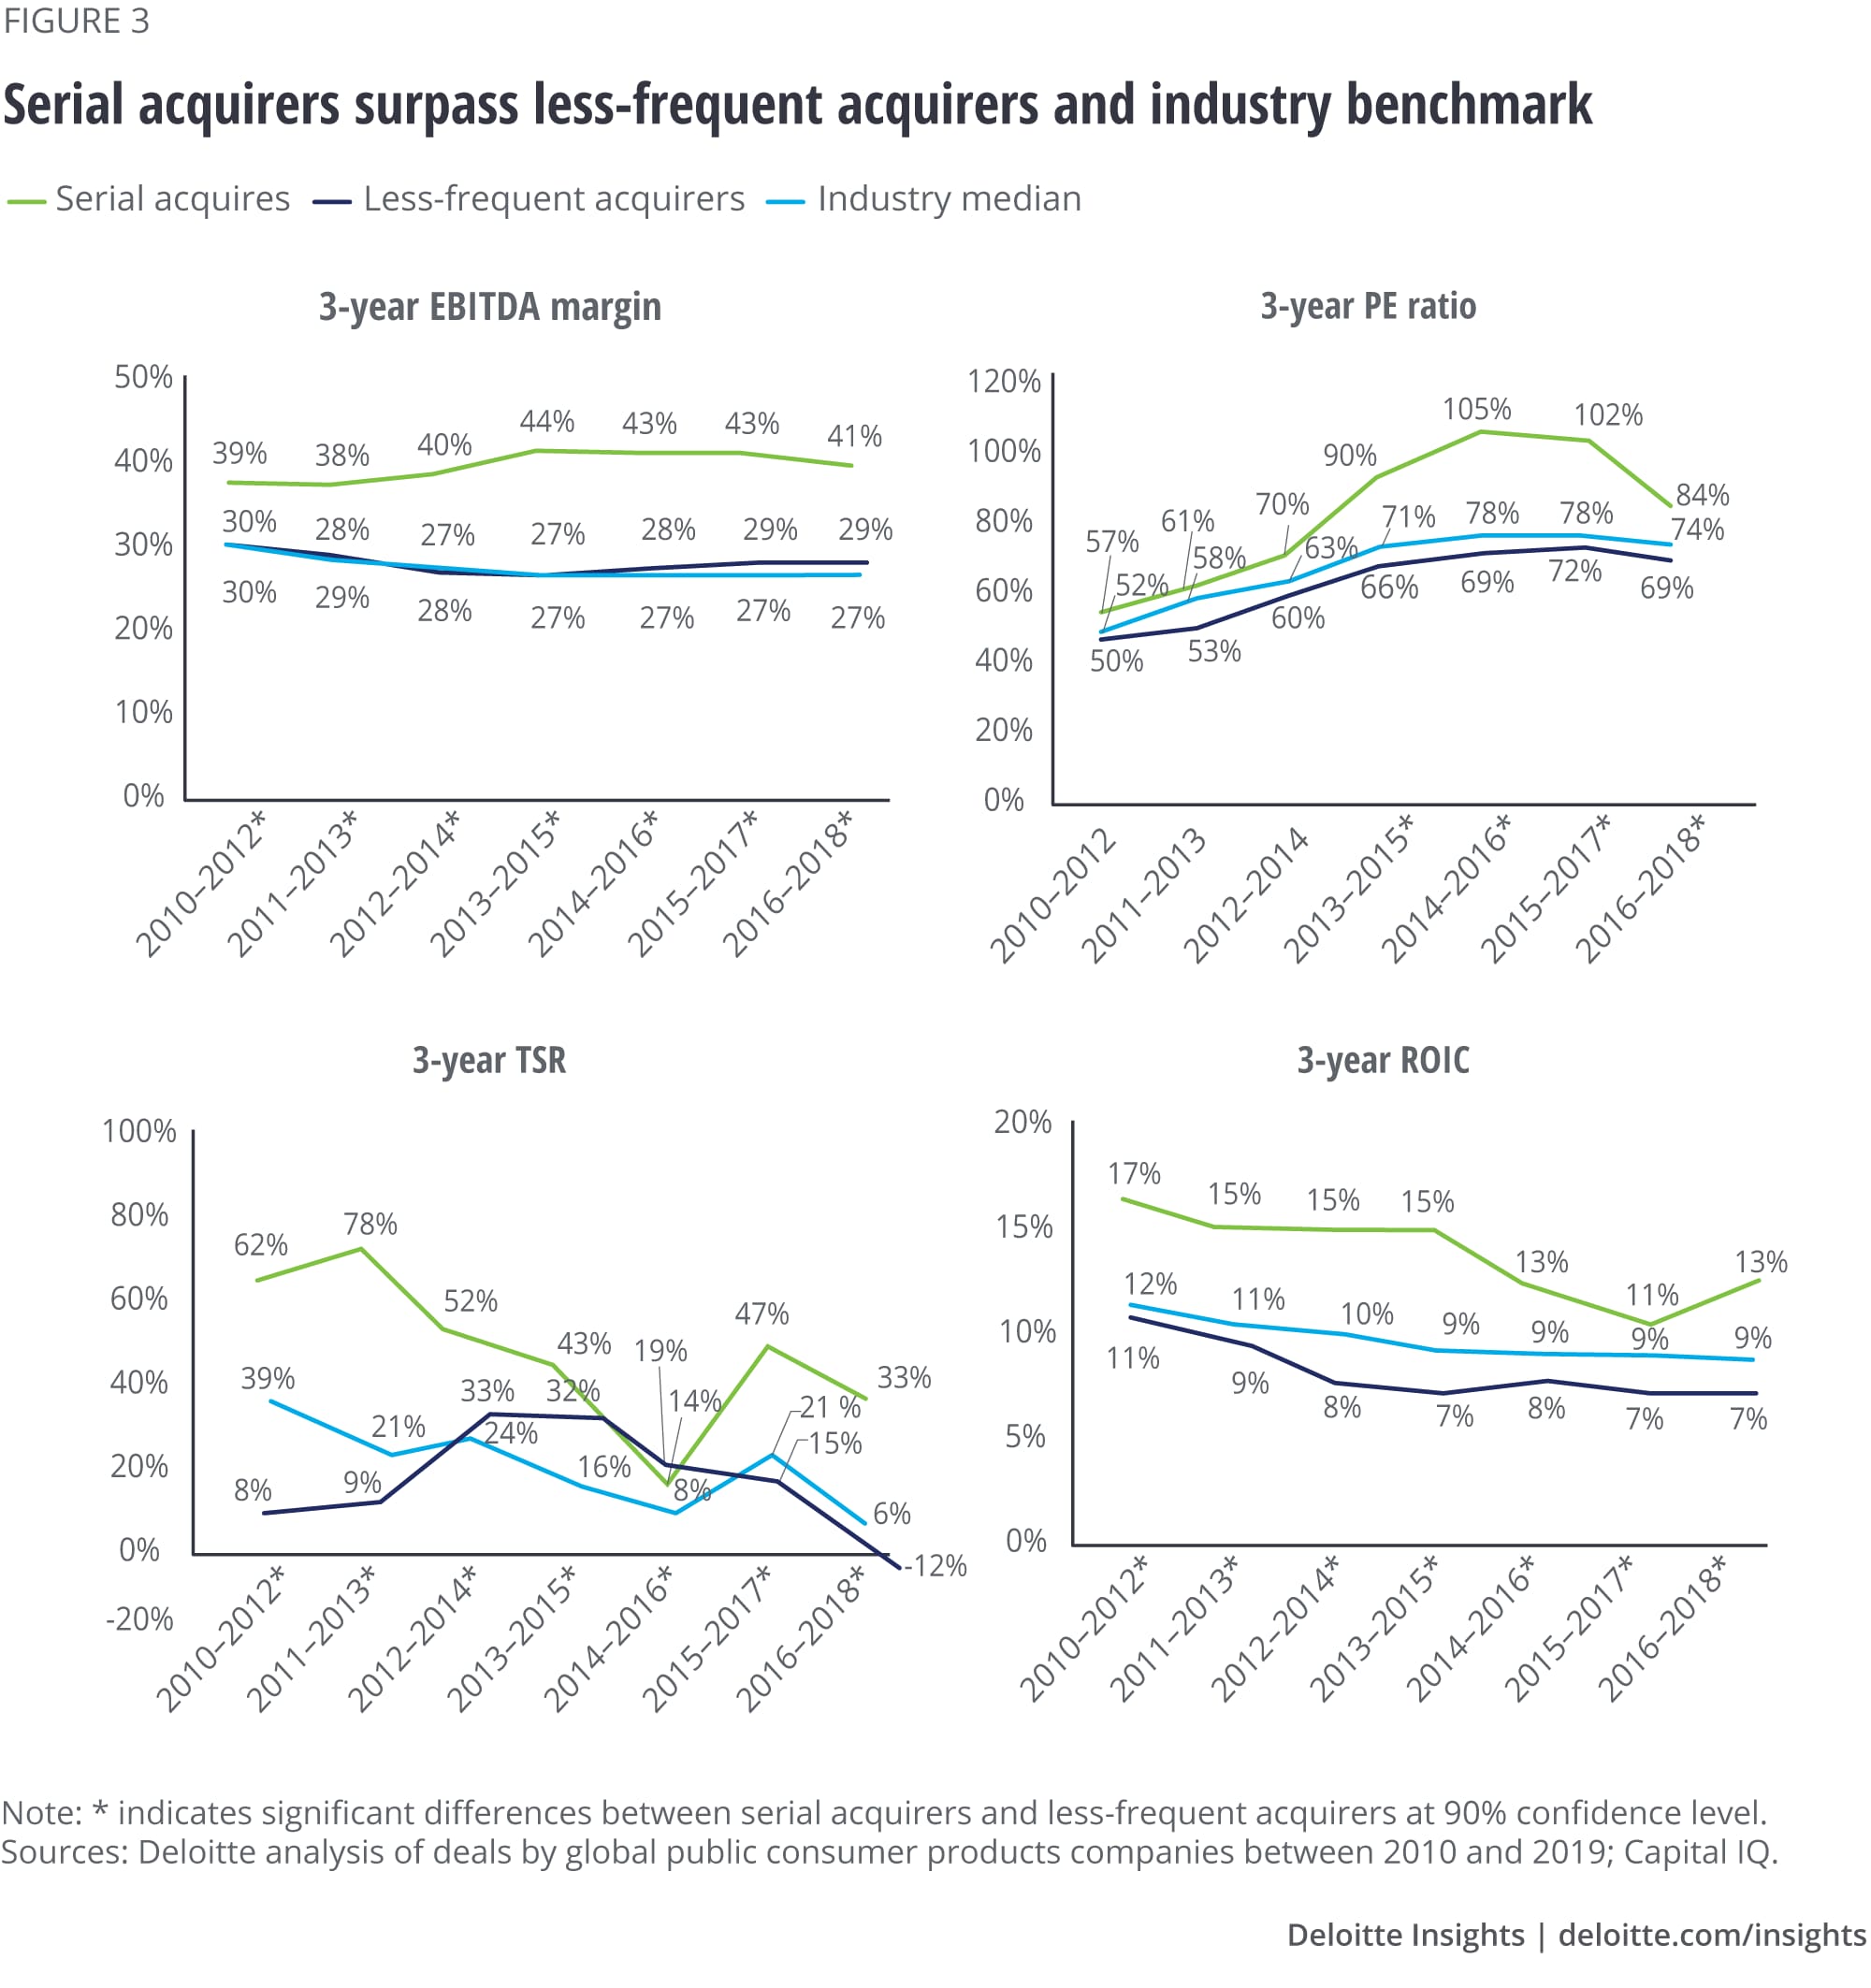 Serial acquirers surpass less frequent acquirers and industry benchmark